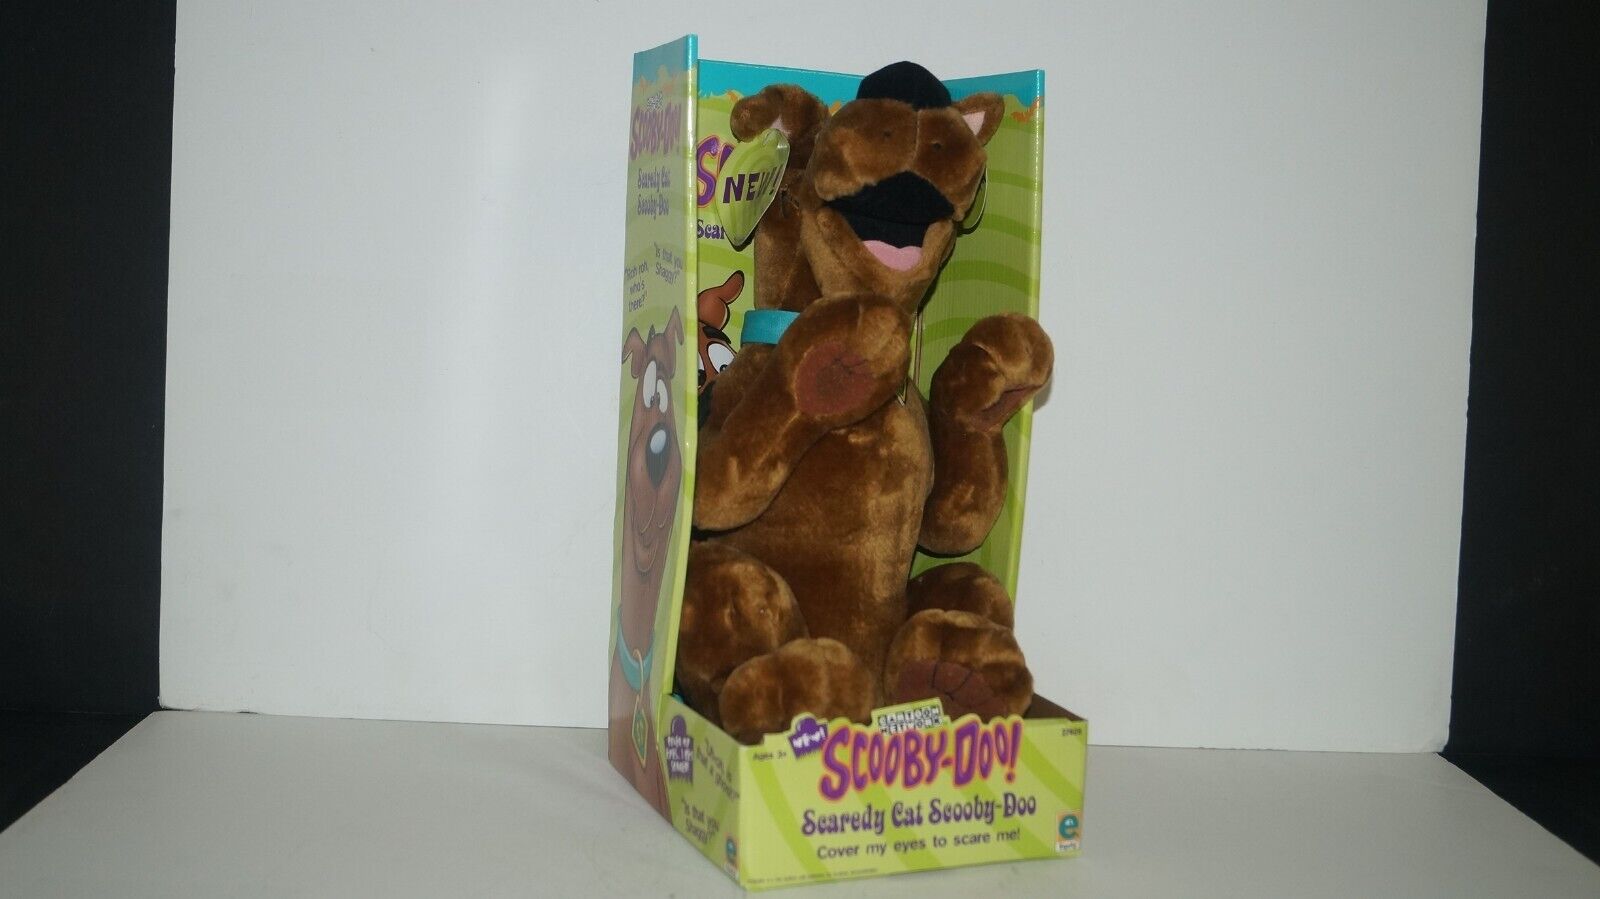 2001 Scaredy Cat SCOOBY DOO Battery Op Talking Dog No. 27409 - NEW IN BOX